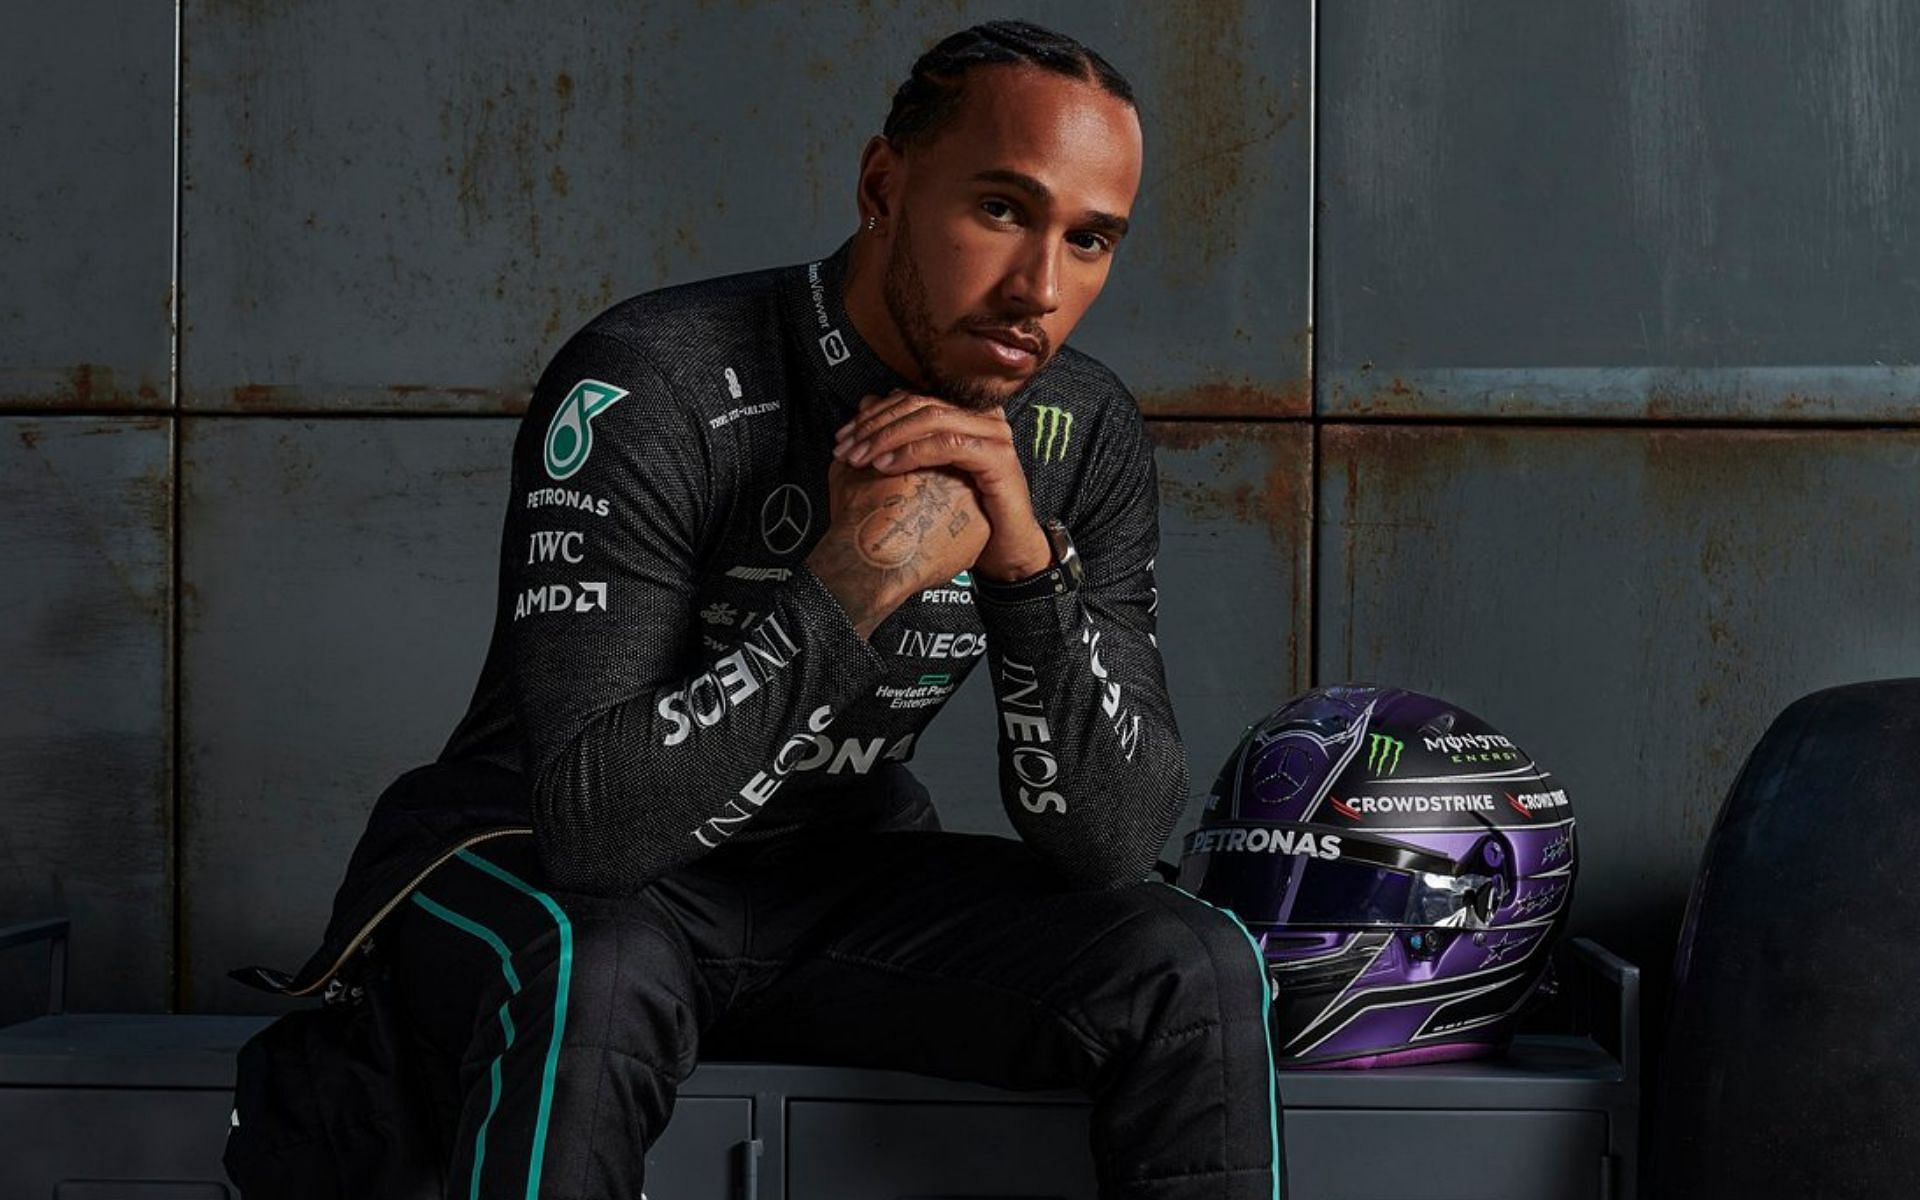 Lewis Hamilton says he cannot wait &ldquo;to attack&rdquo; once again for the championship in 2022 (Image Courtesy: Twitter/@MercedesAMGF1